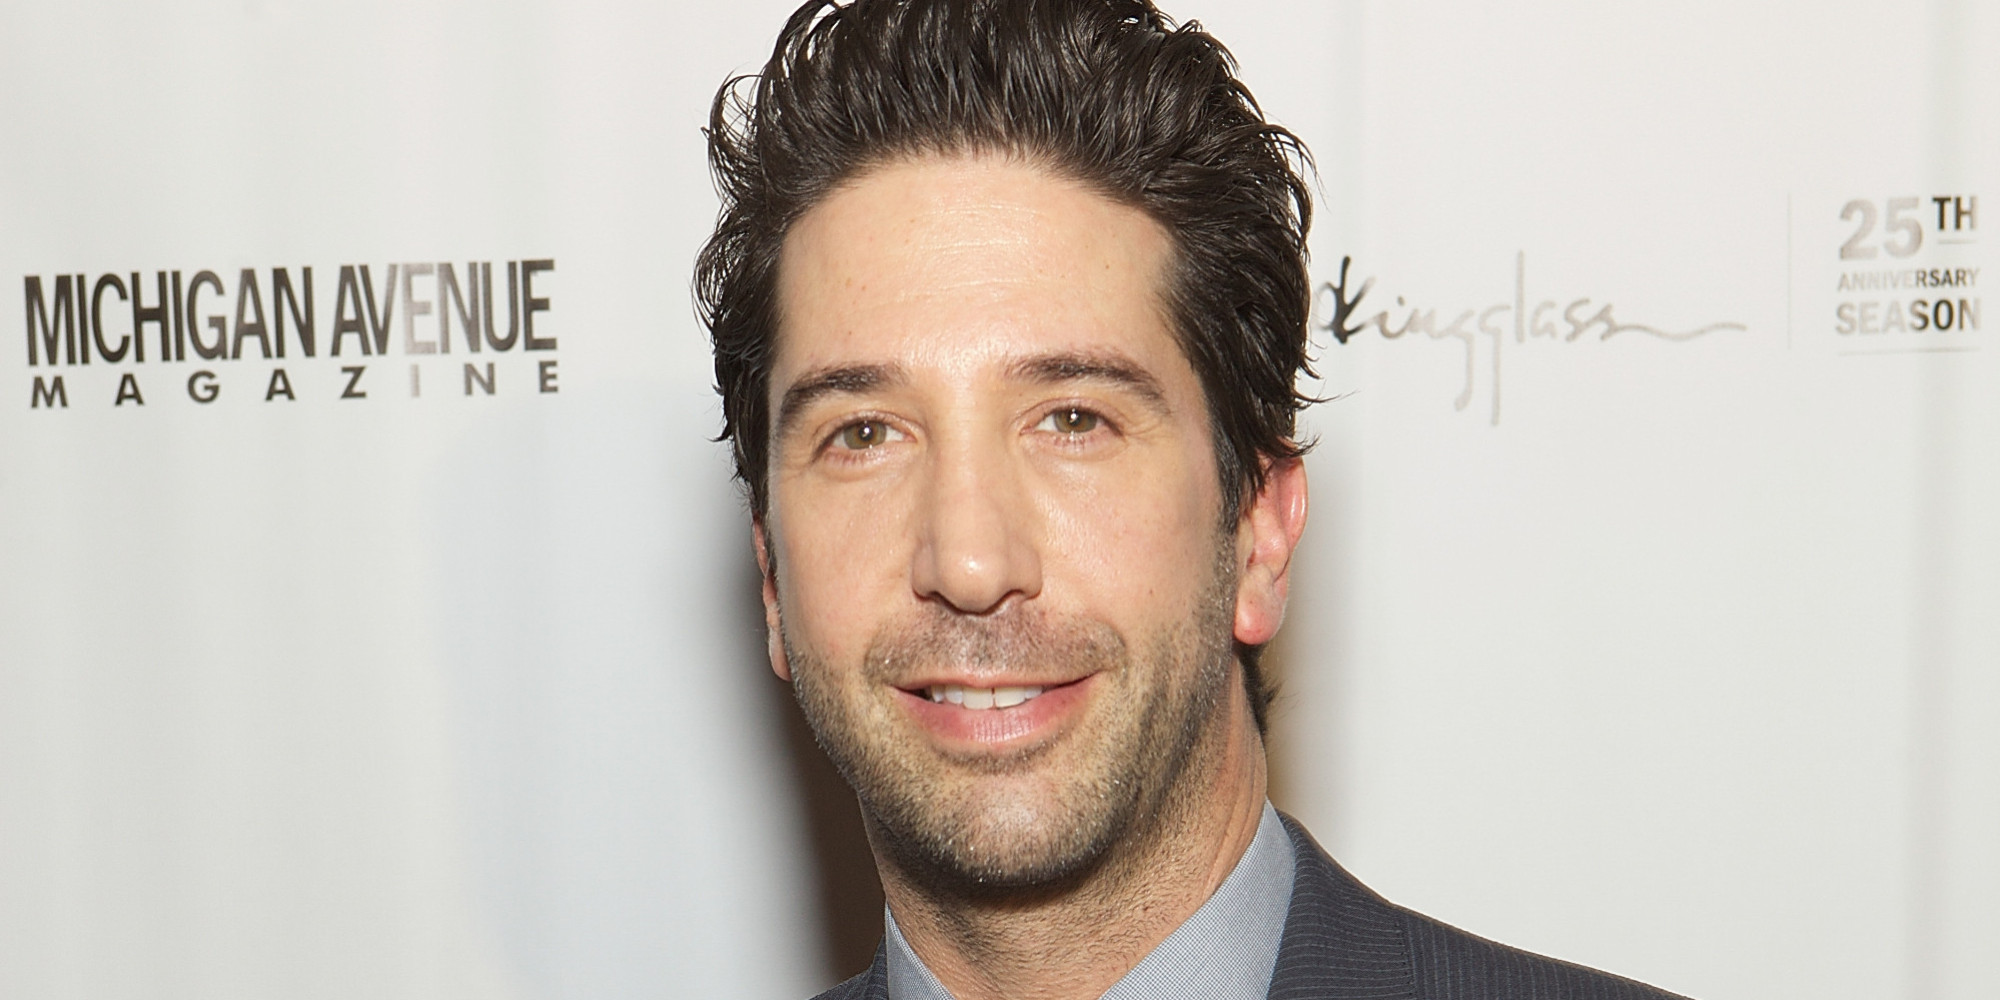 Michigan Avenue Magazine Celebrates Cover Star David Schwimmer With Russian Standard Vodka At The Dec Rooftop Lounge + Bar